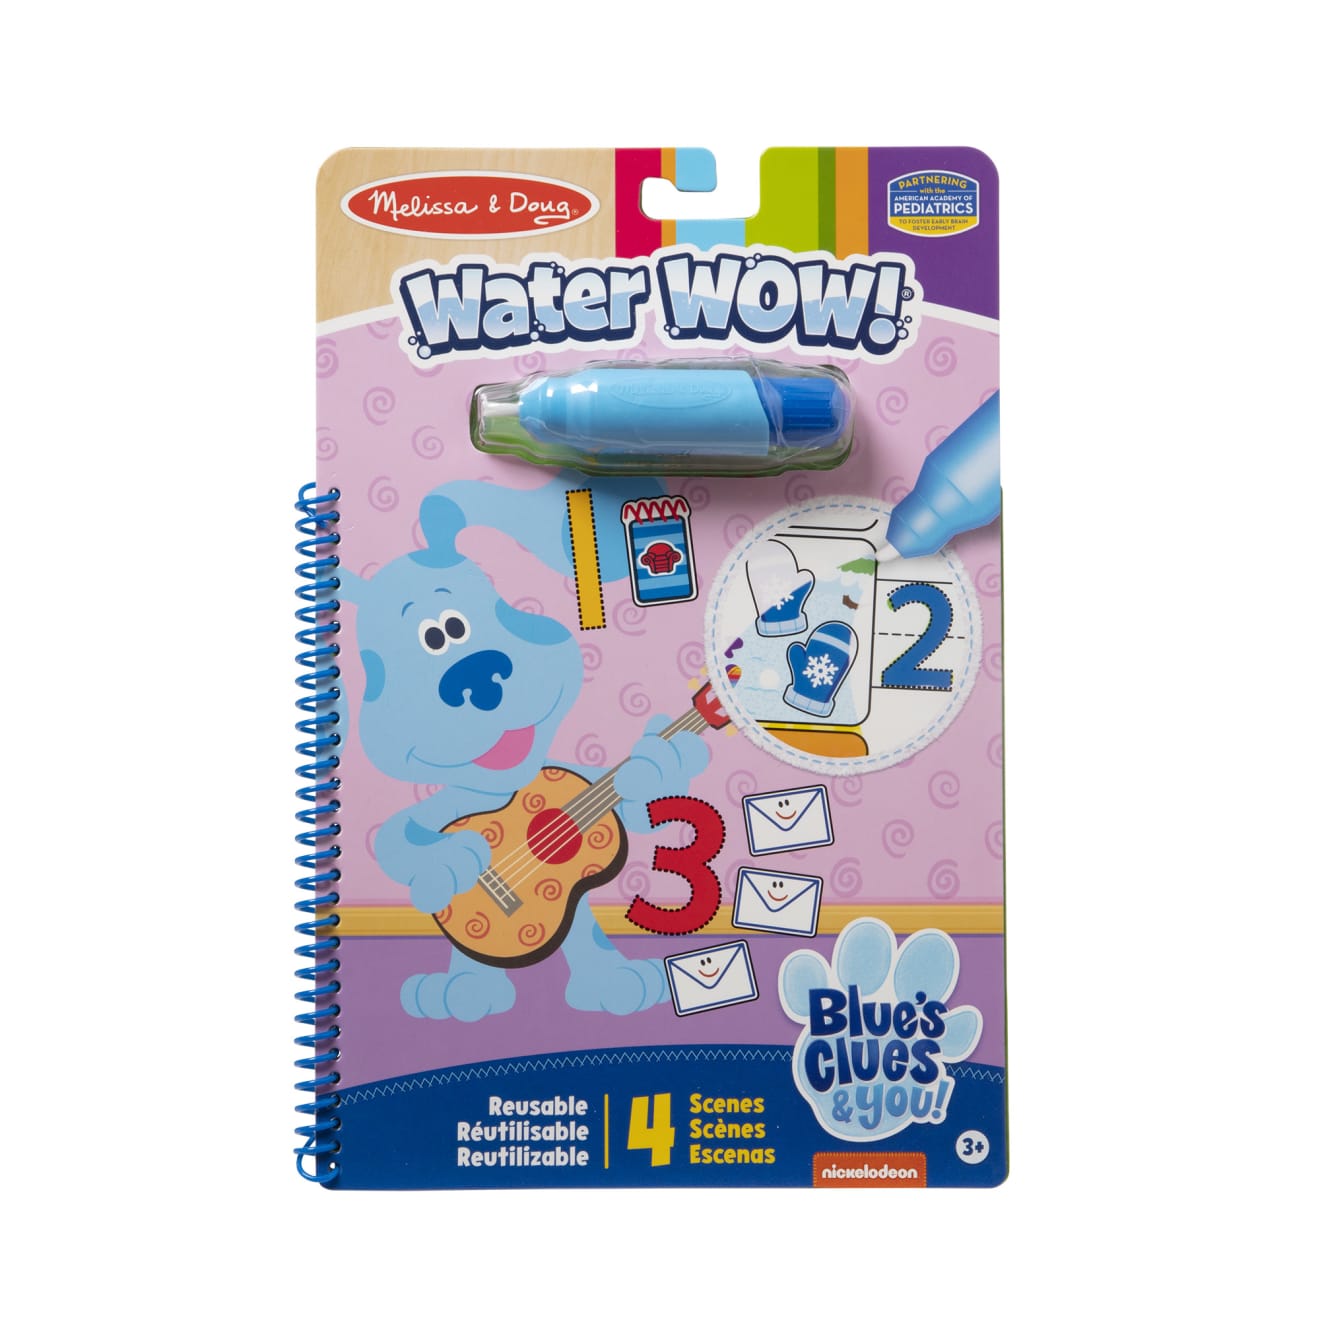 https://cdn.shopify.com/s/files/1/0550/8487/5830/products/Blues-Clues-You-Water-Wow_-Counting-033001-1-Packaging-Photo.jpg?v=1664891770